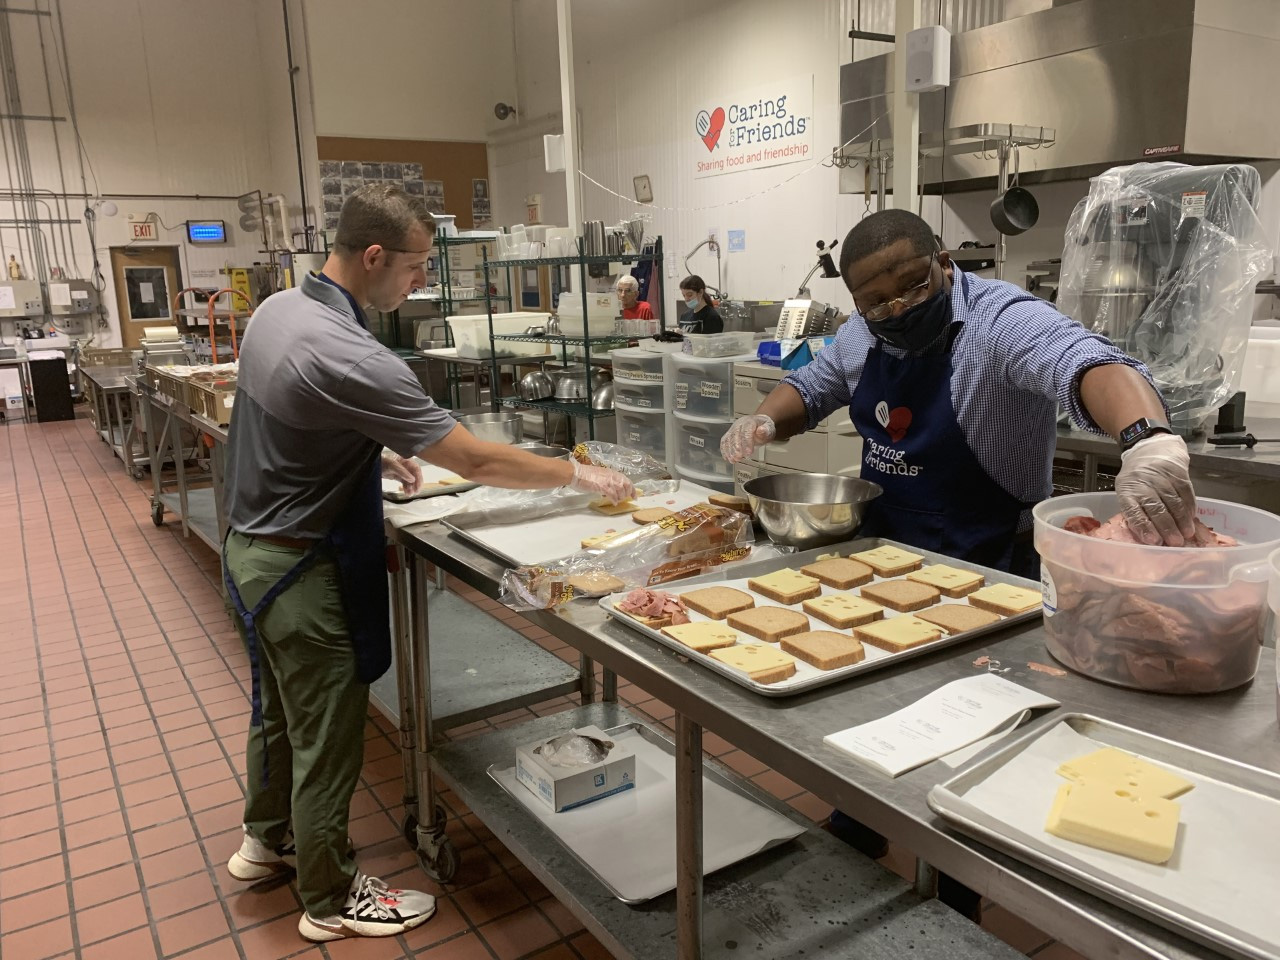 Otis Employees - More than 500 sandwiches were packed for homeless families and veterans through the non-profit Caring for Friends in Philadelphia. 